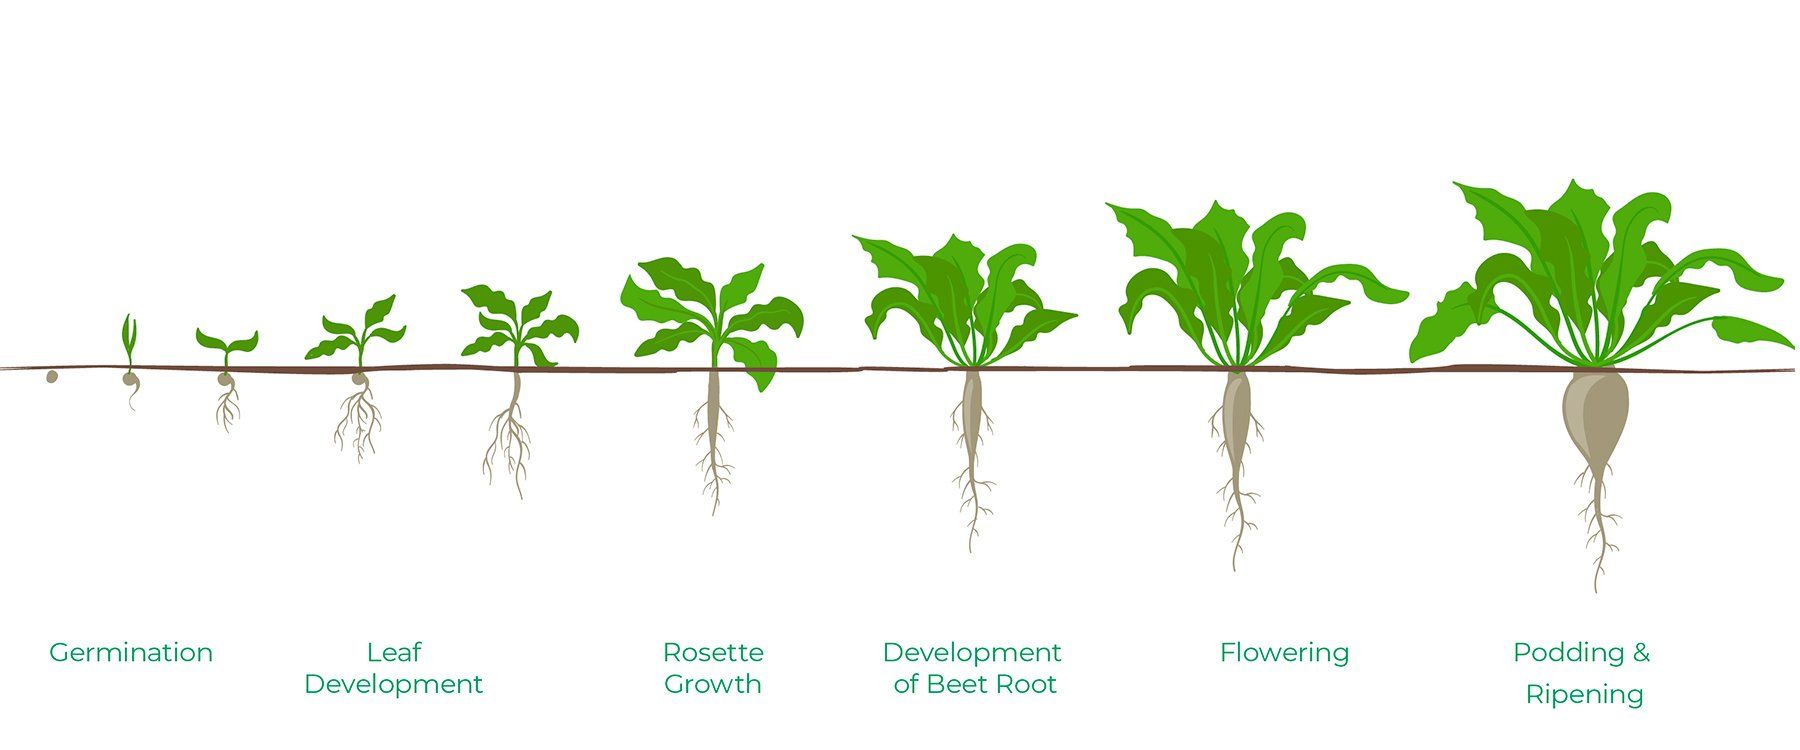 Sunflower Growth Stages